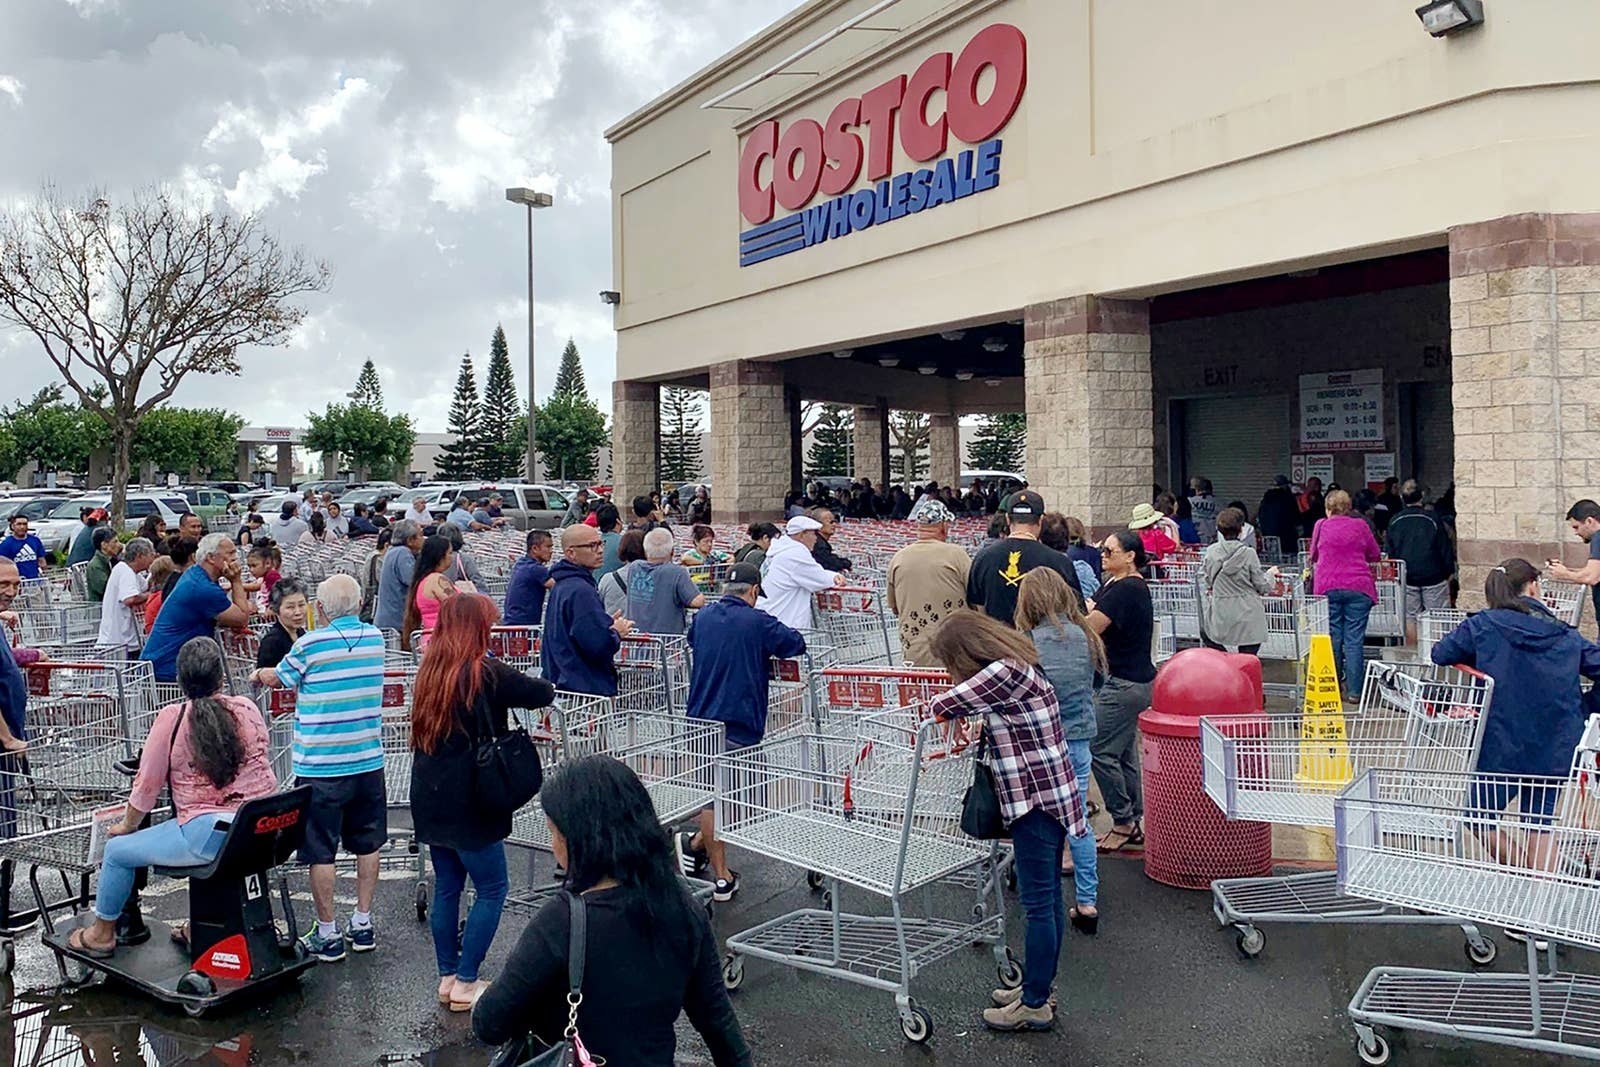 Shoppers with empty carts stand in a disorganized group outside a Costco